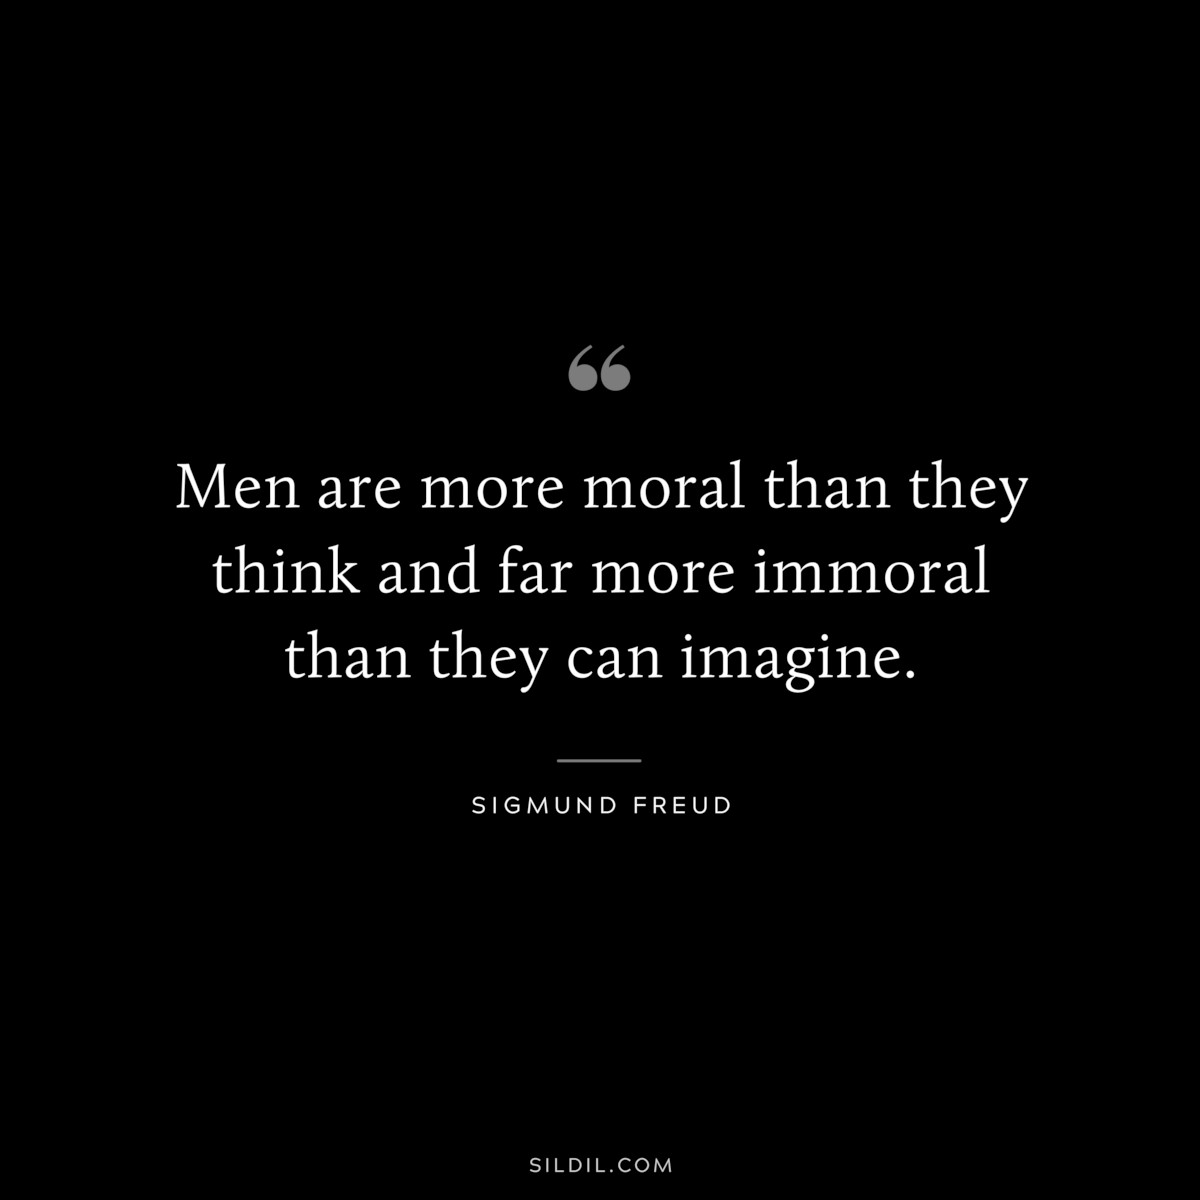 Men are more moral than they think and far more immoral than they can imagine. ― Sigmund Frued